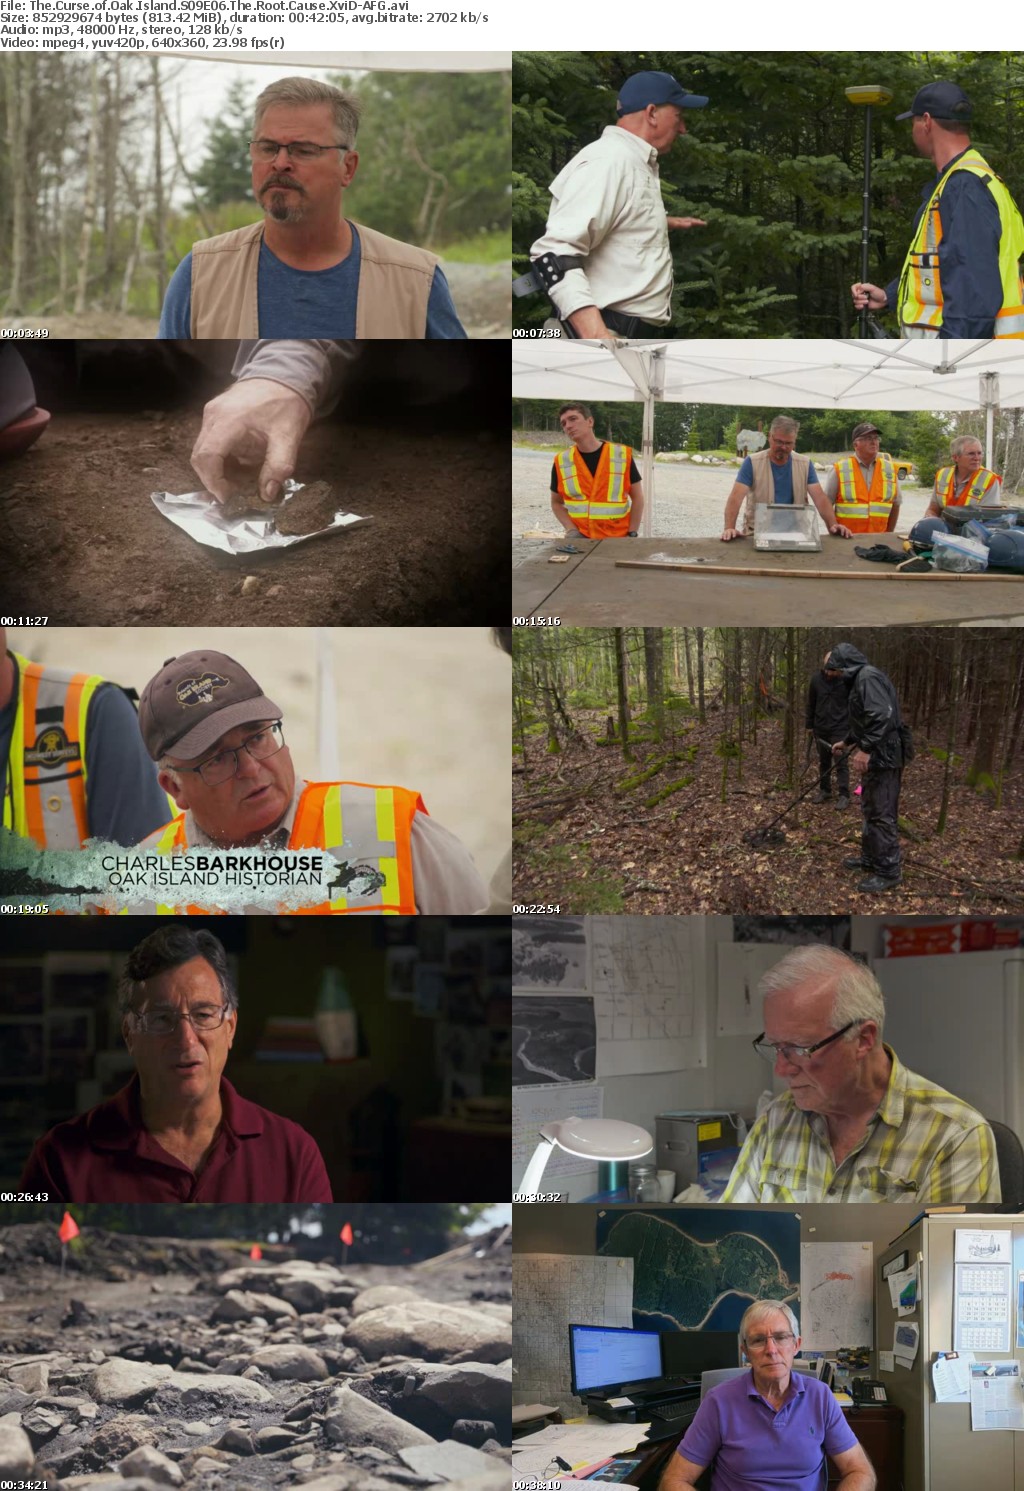 The Curse of Oak Island S09E06 The Root Cause XviD-AFG